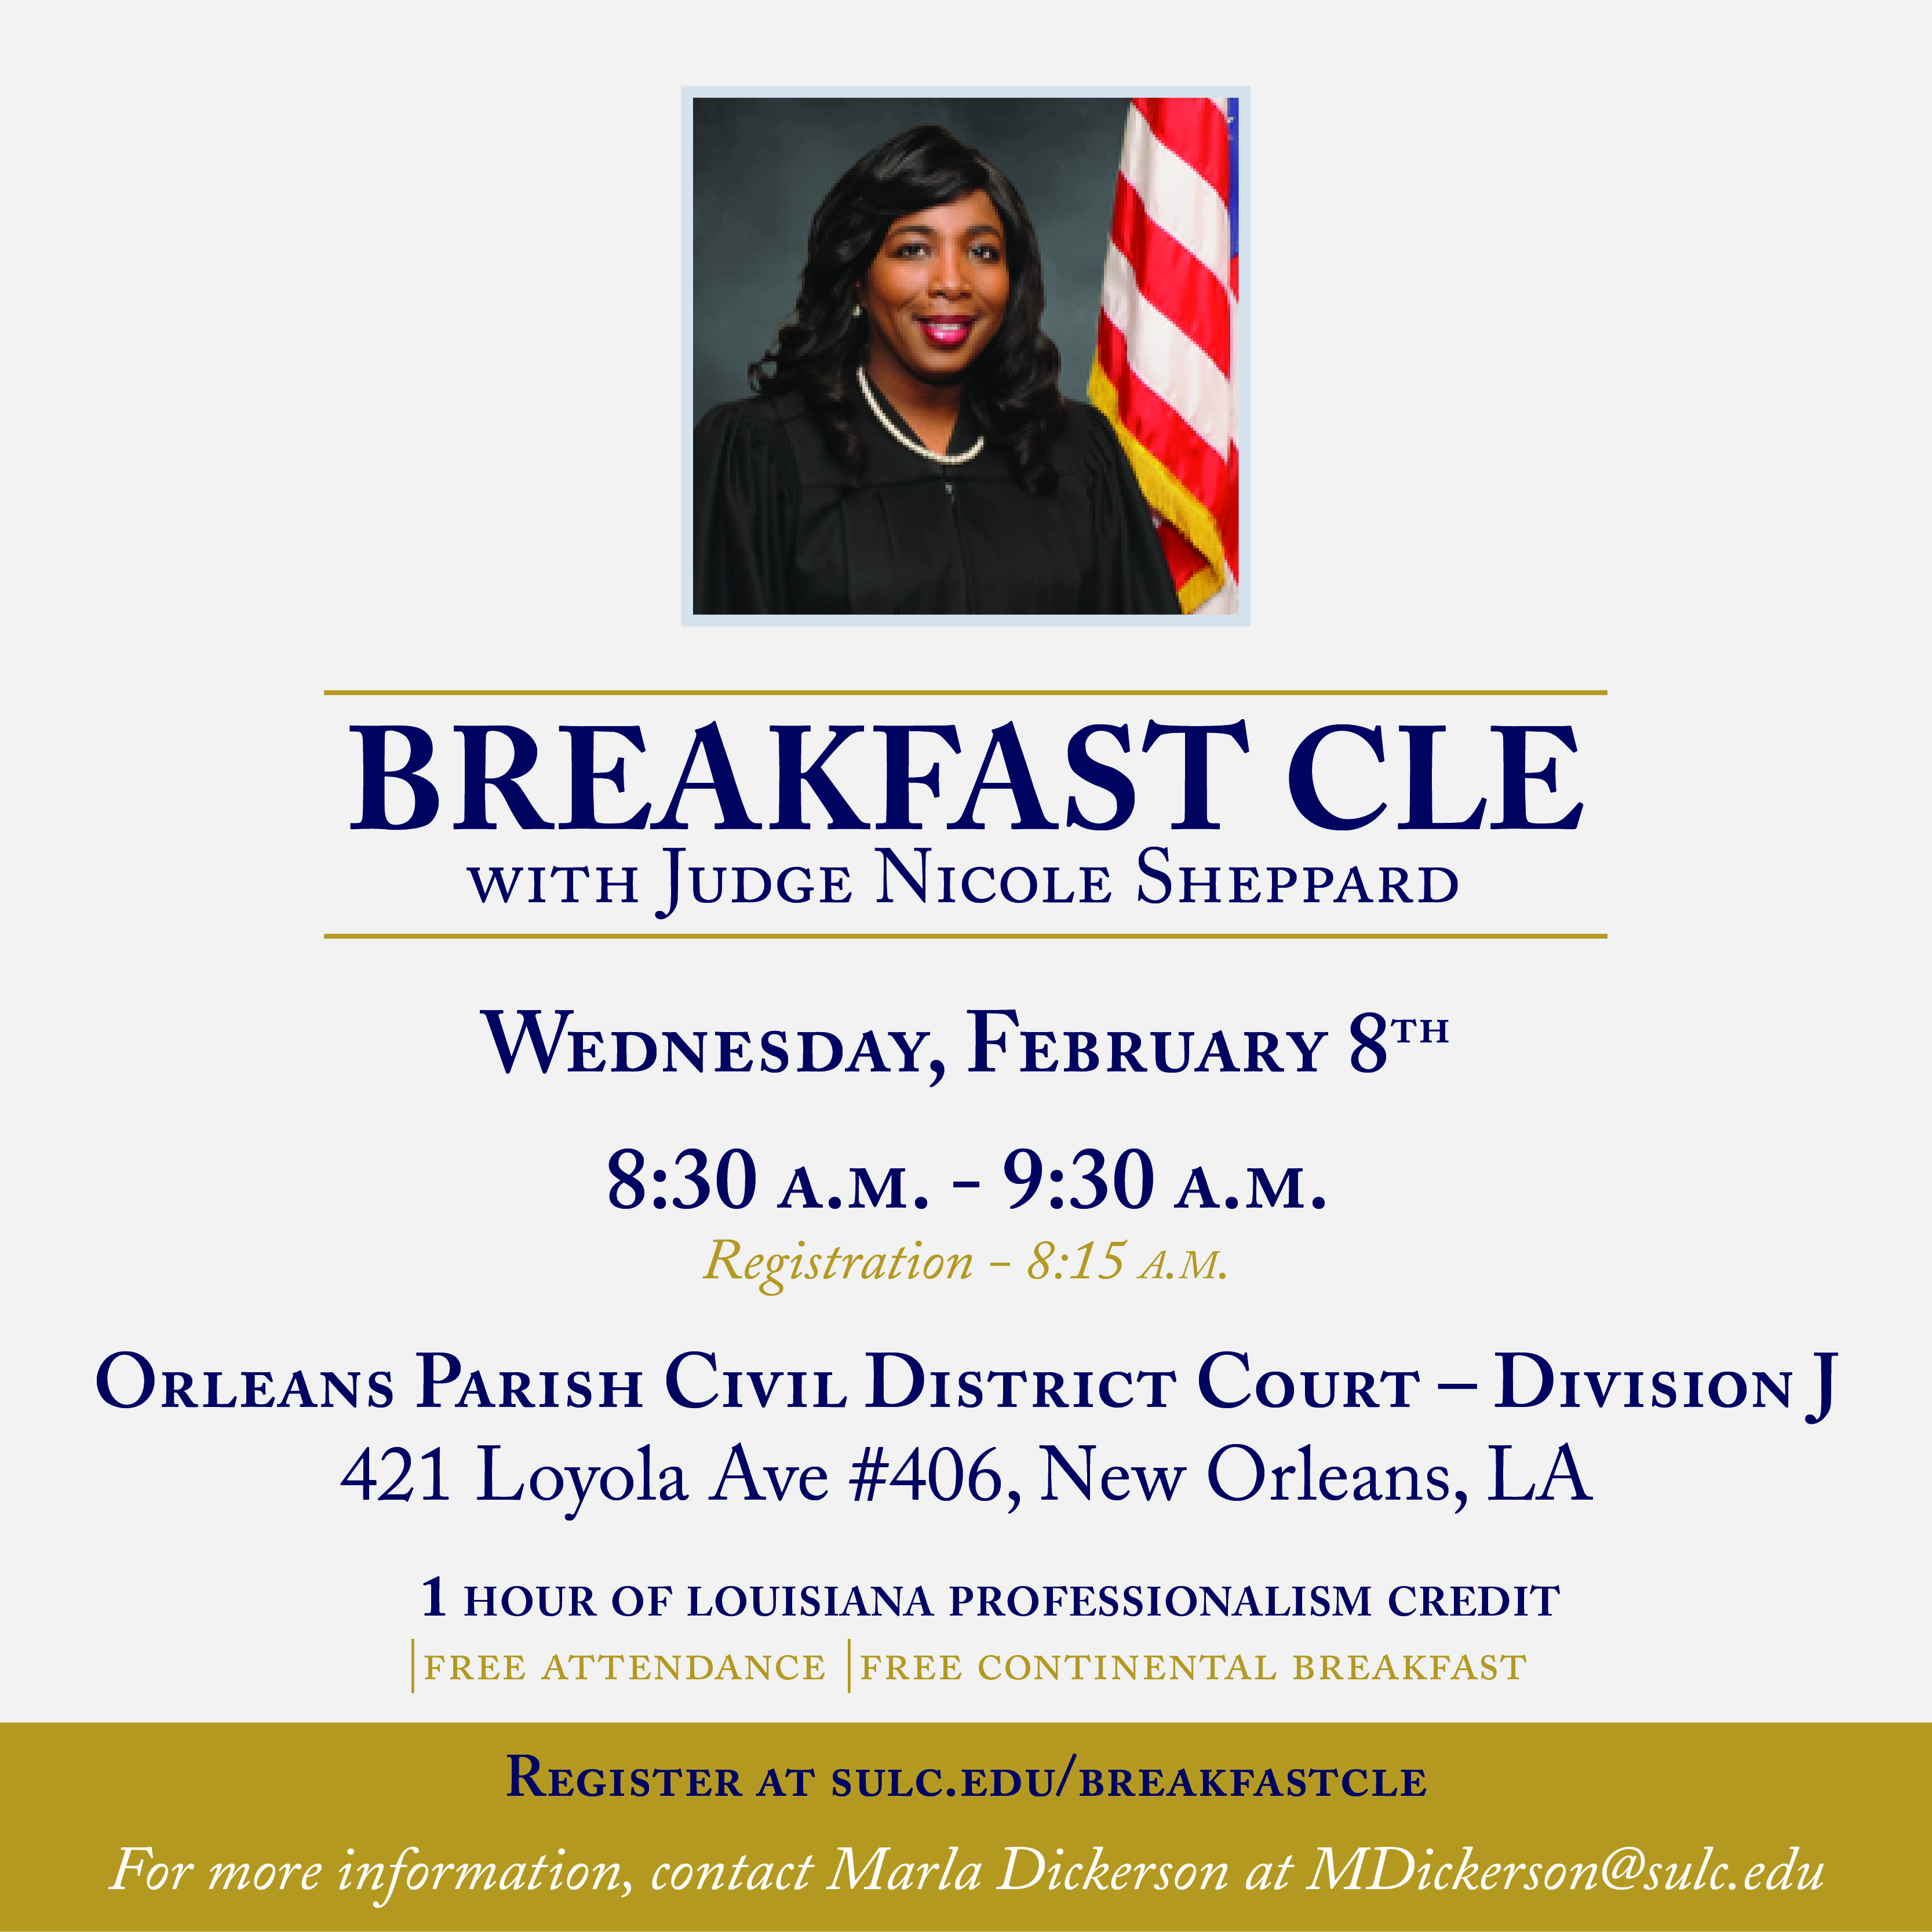 Breakfast CLE with Judge Nicole Sheppard